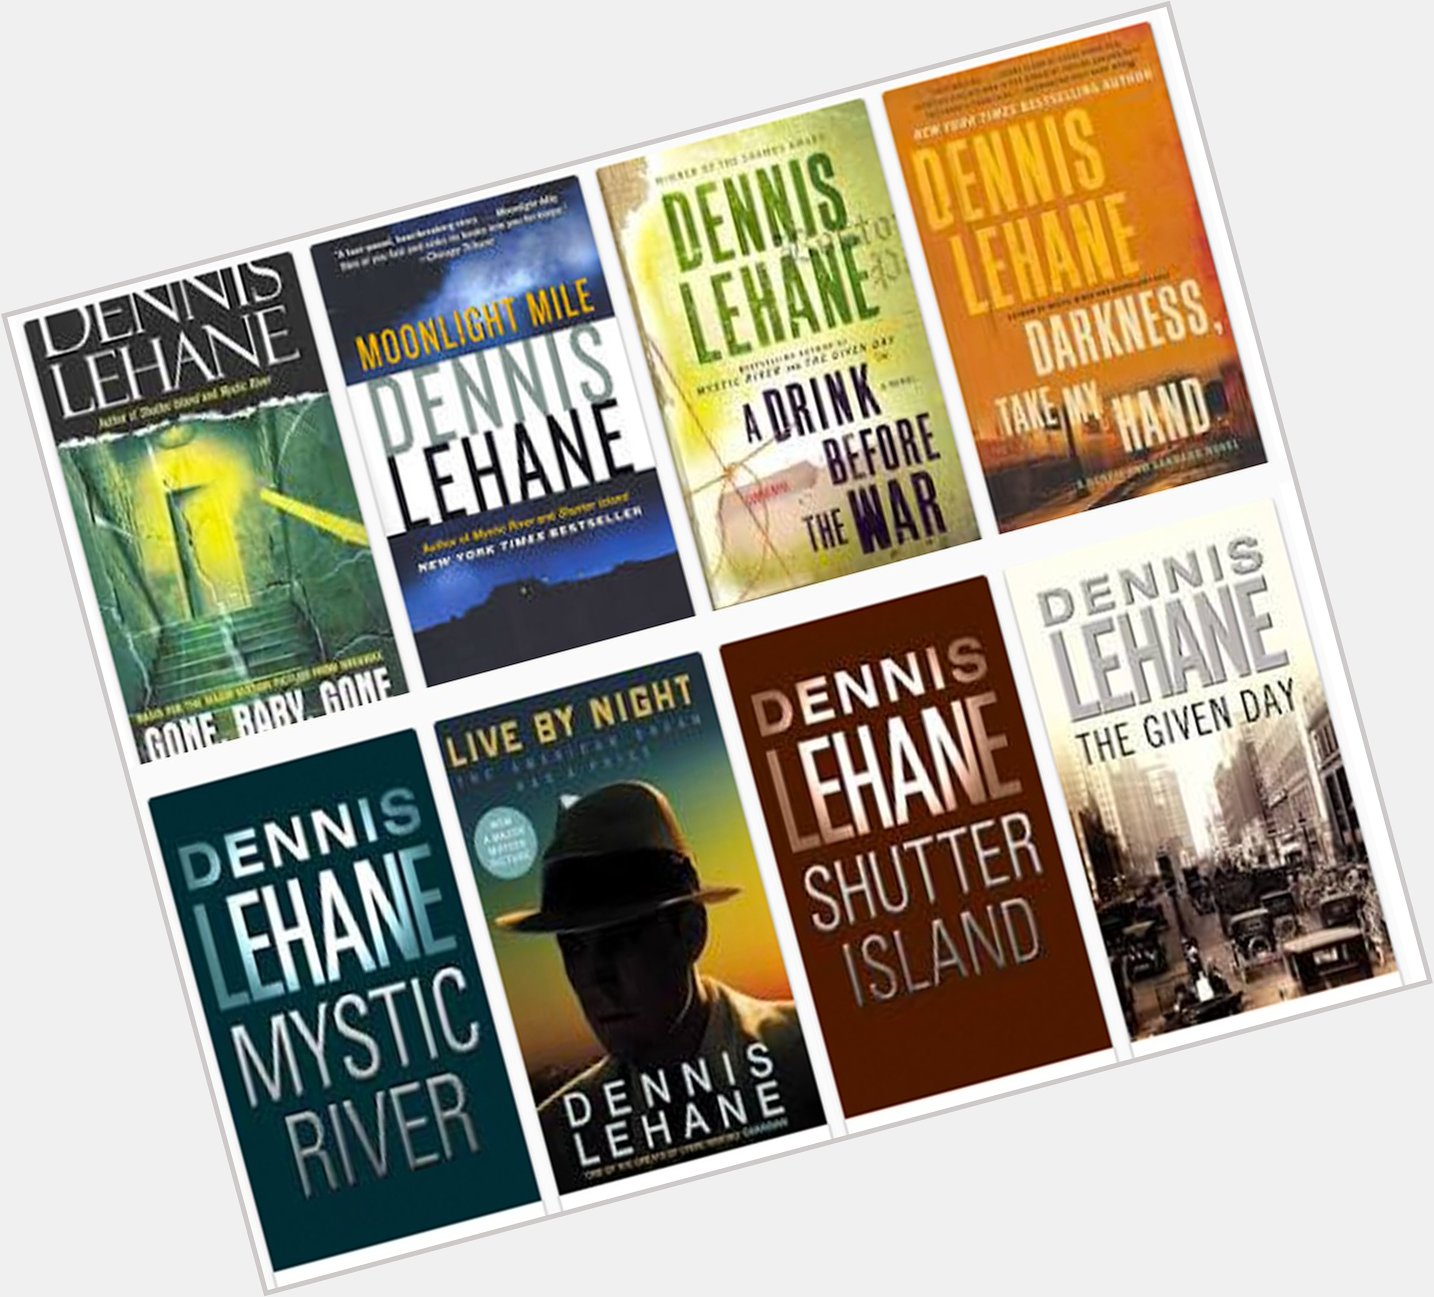 Please join me in wishing Dennis Lehane a very happy birthday today. Best wishes, Mr L! 